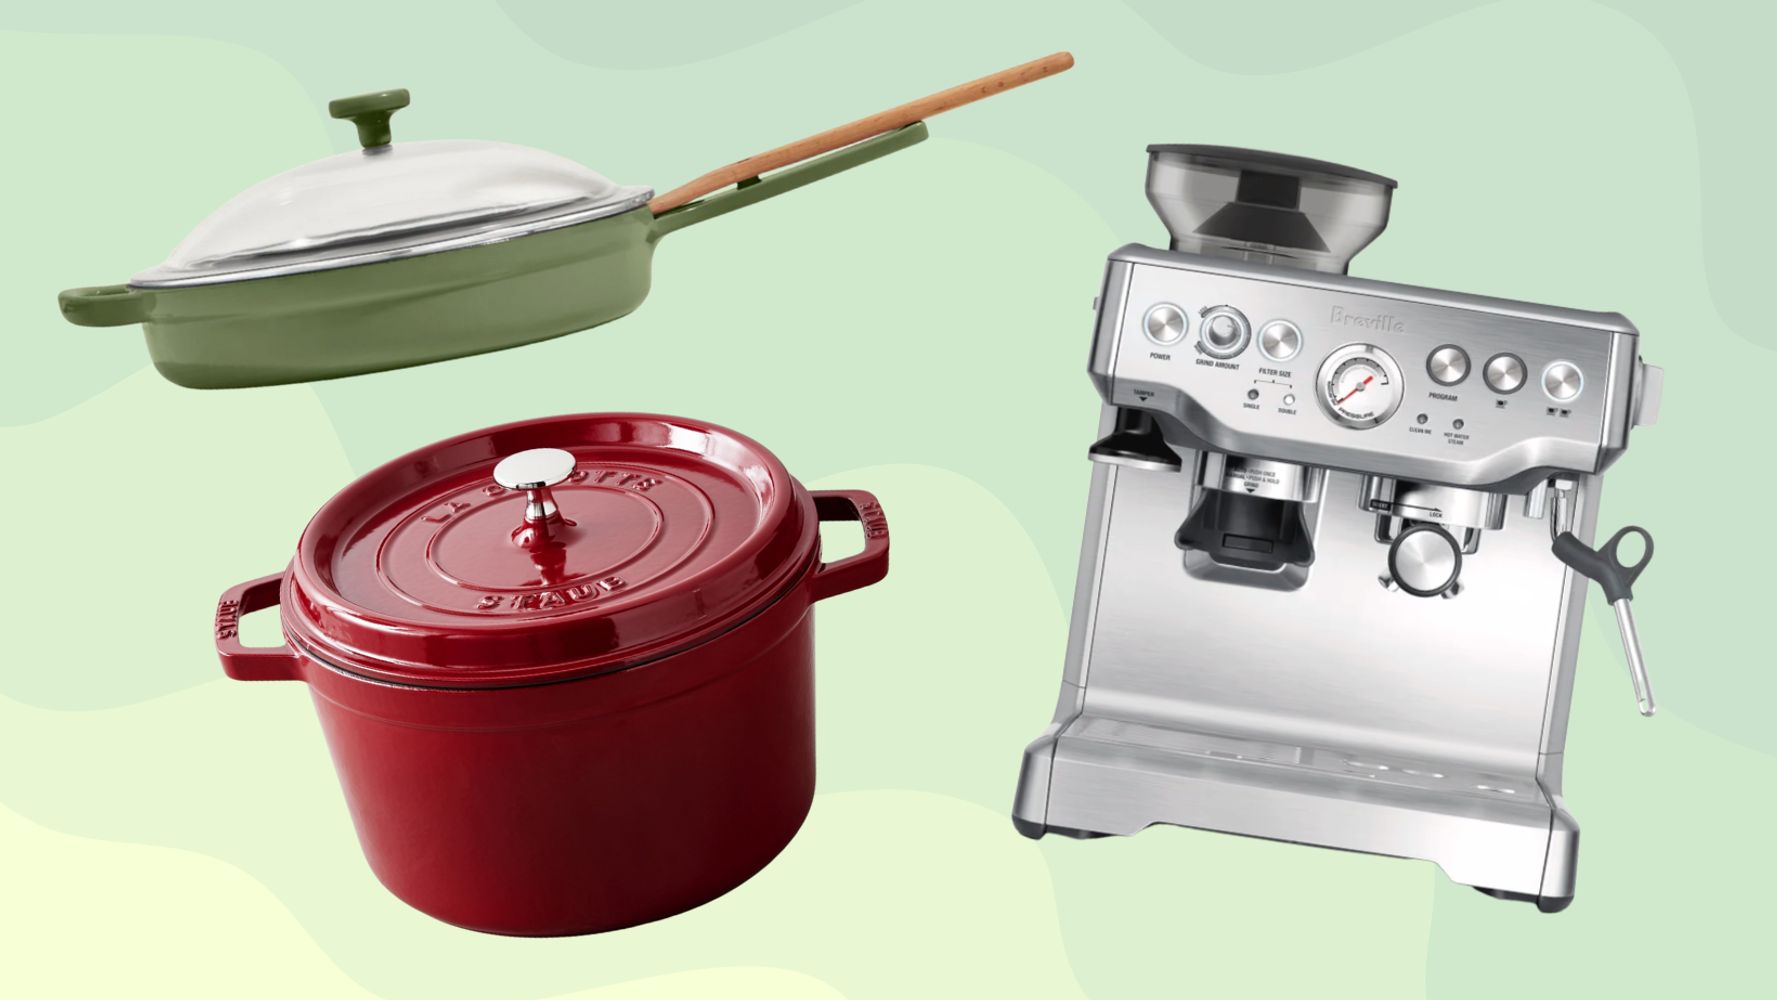 Made In Cookware Is Up To 30% Off For Their Presidents' Day Sale